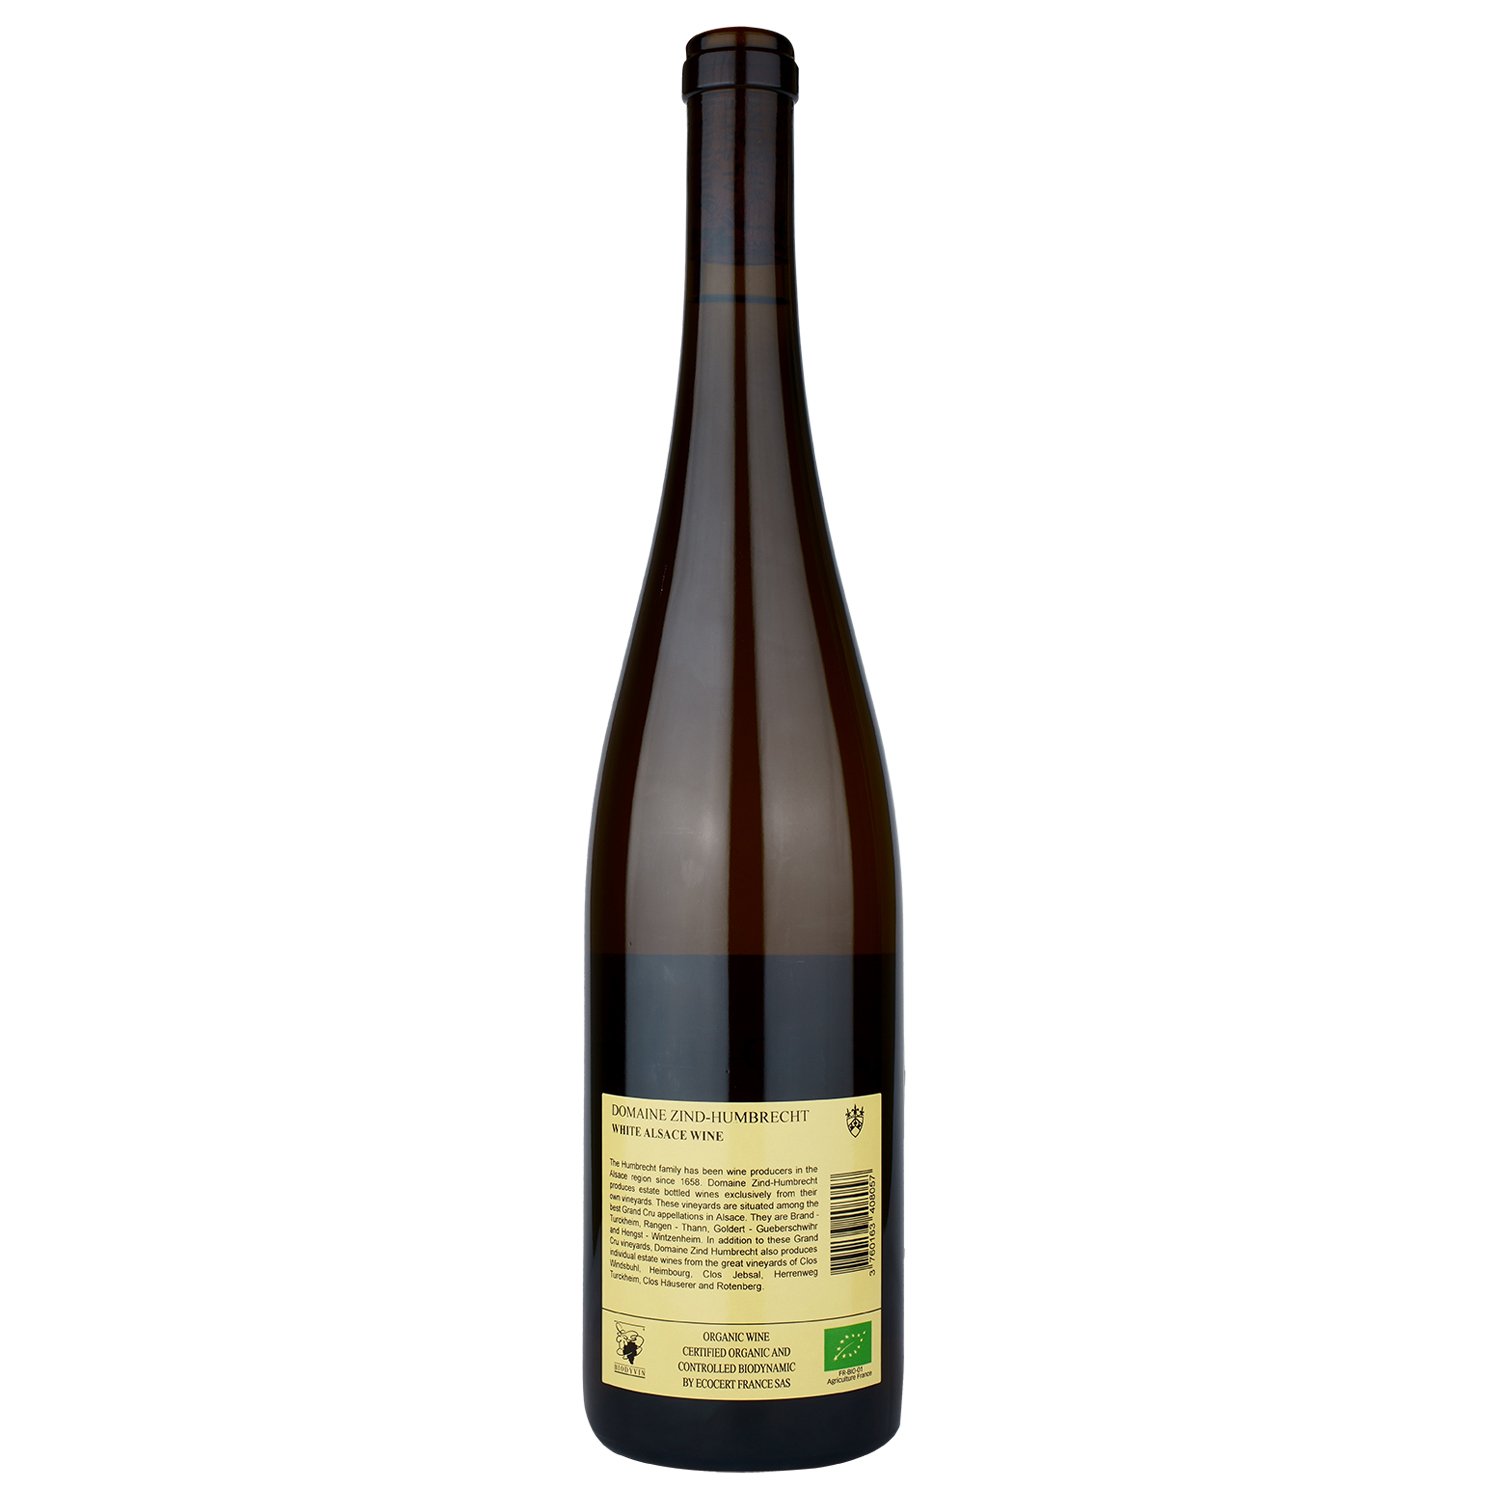 Вино Zind-Humbrecht Riesling Roche Roulee 2019, біле, сухе, 0,75 л (R4904) - фото 2